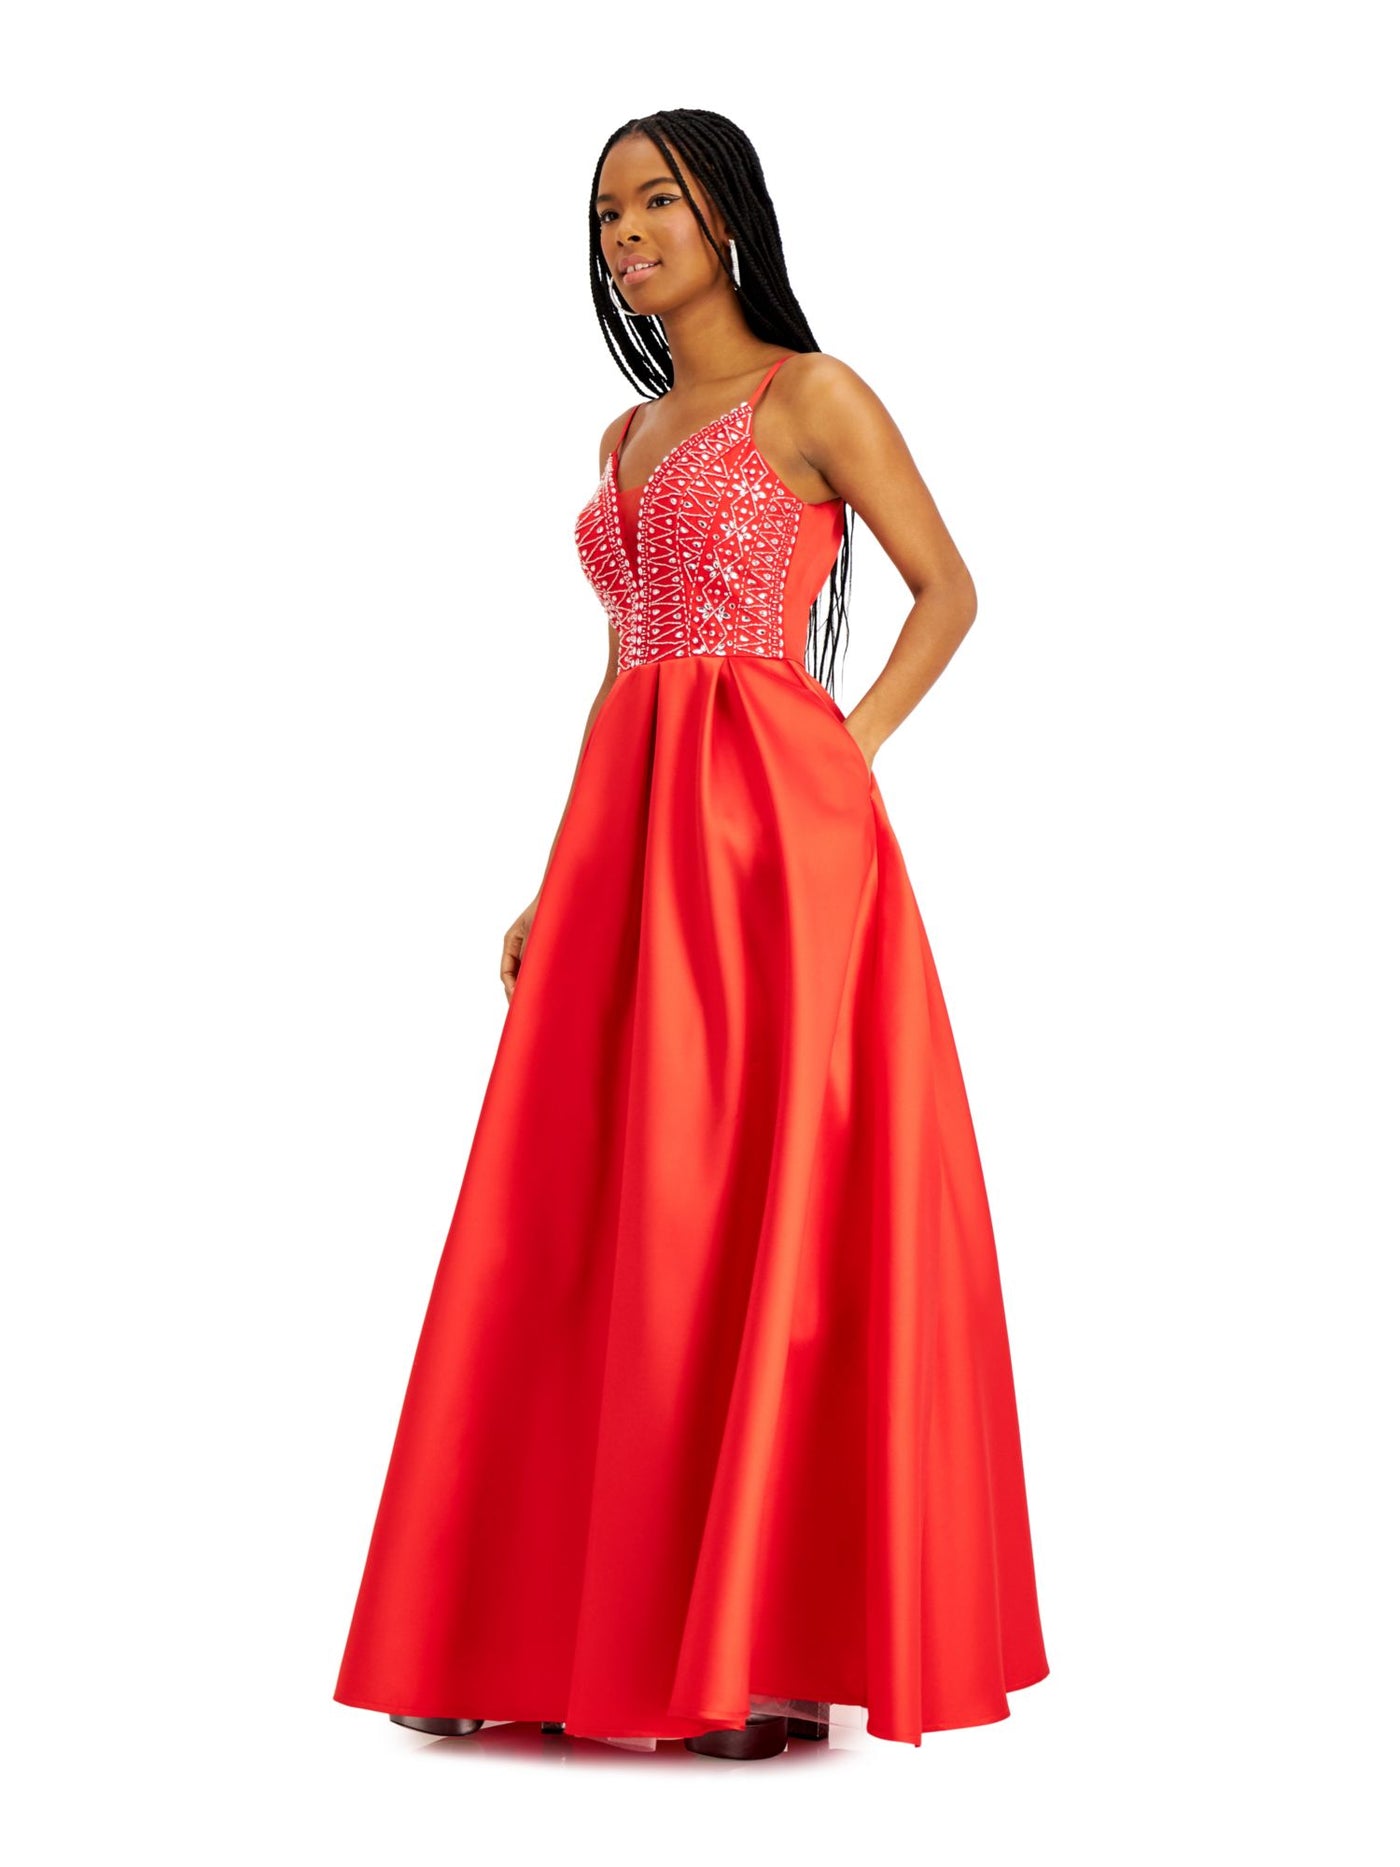 SAY YES TO THE PROM Womens Red Embellished Spaghetti Strap V Neck Full-Length Prom Fit + Flare Dress Juniors 9\10